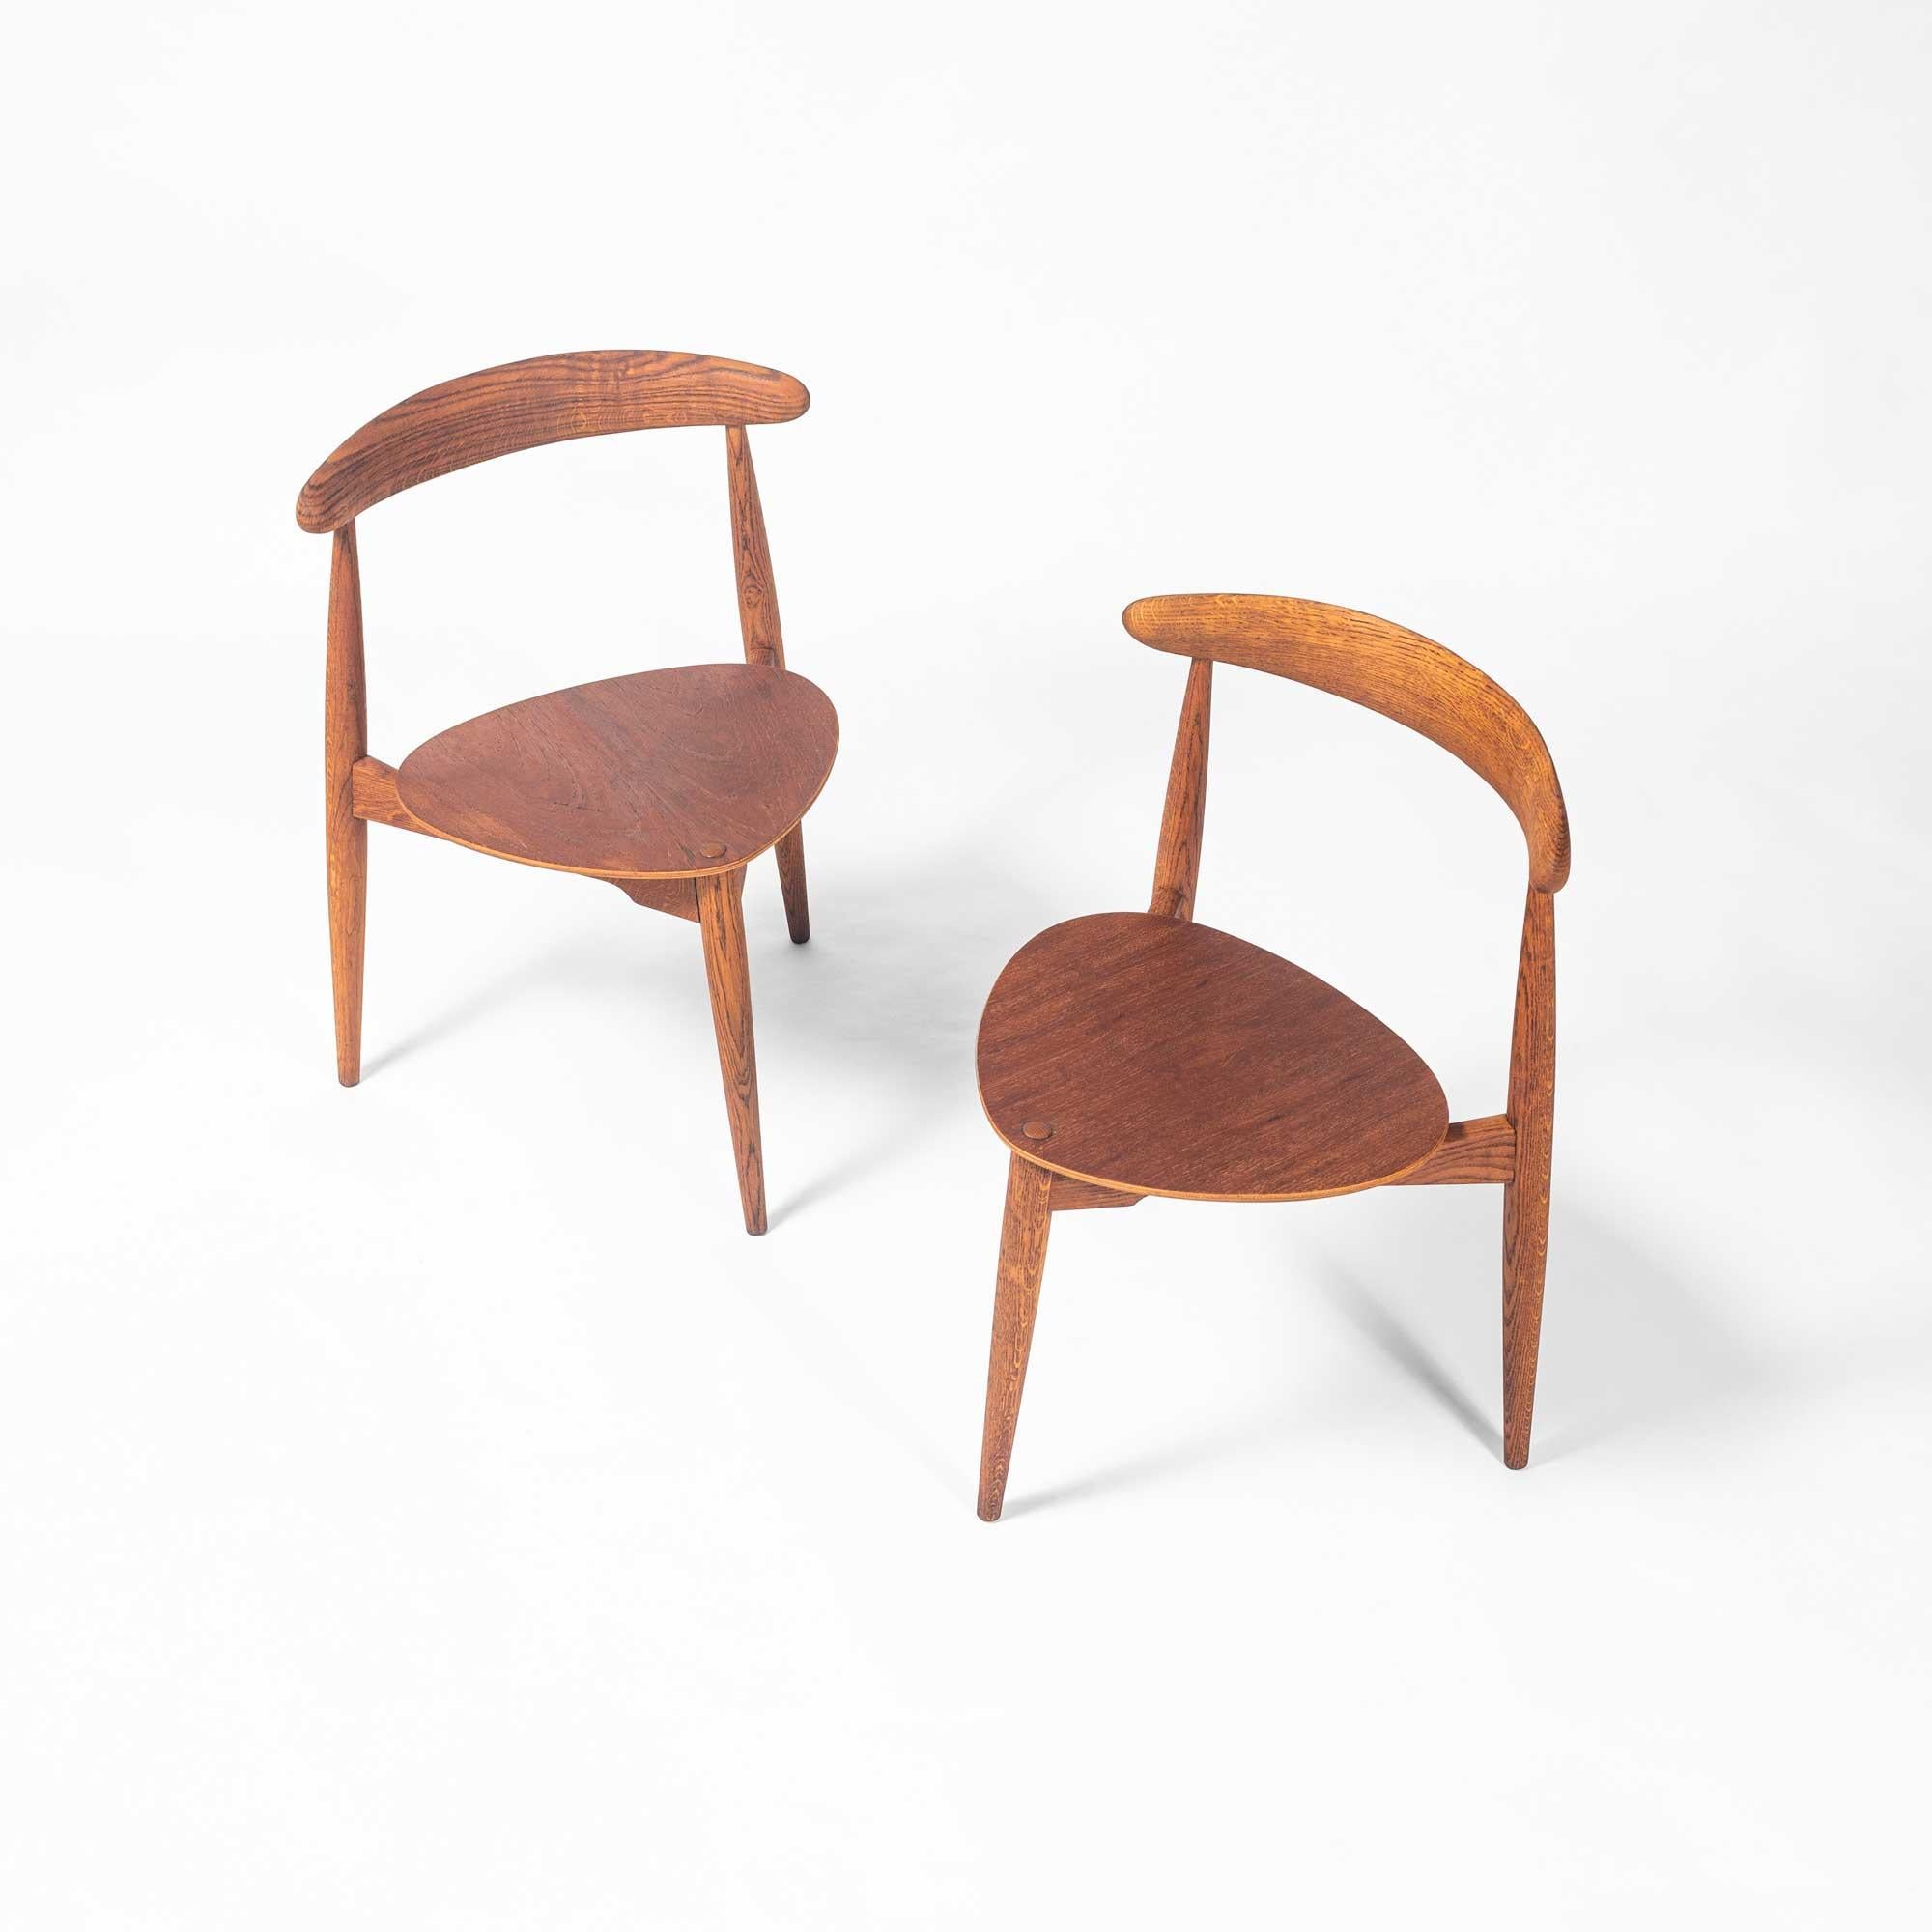 Pair of dining chairs model FH4103, is designed by Hans Wegner in 1953. The chairs are designed to take up as little space as possible whilst at the same time having a simplistic, natural and timeless aesthetics. The chairs have only three legs, so